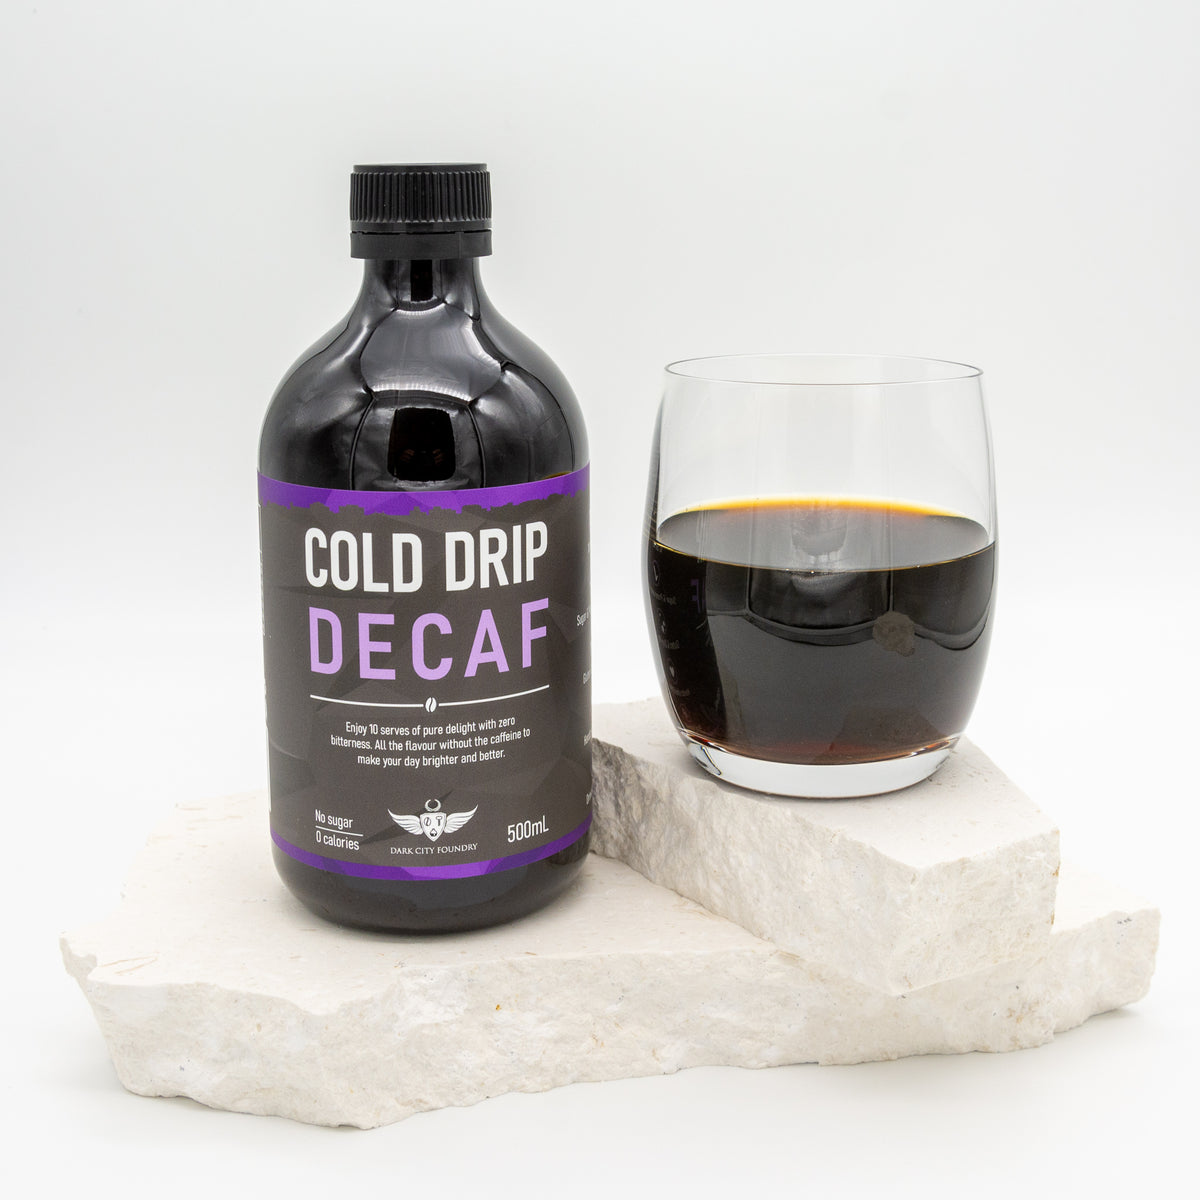 glass of decaf cold drip coffee pictured with a 500ml bottle of coffee